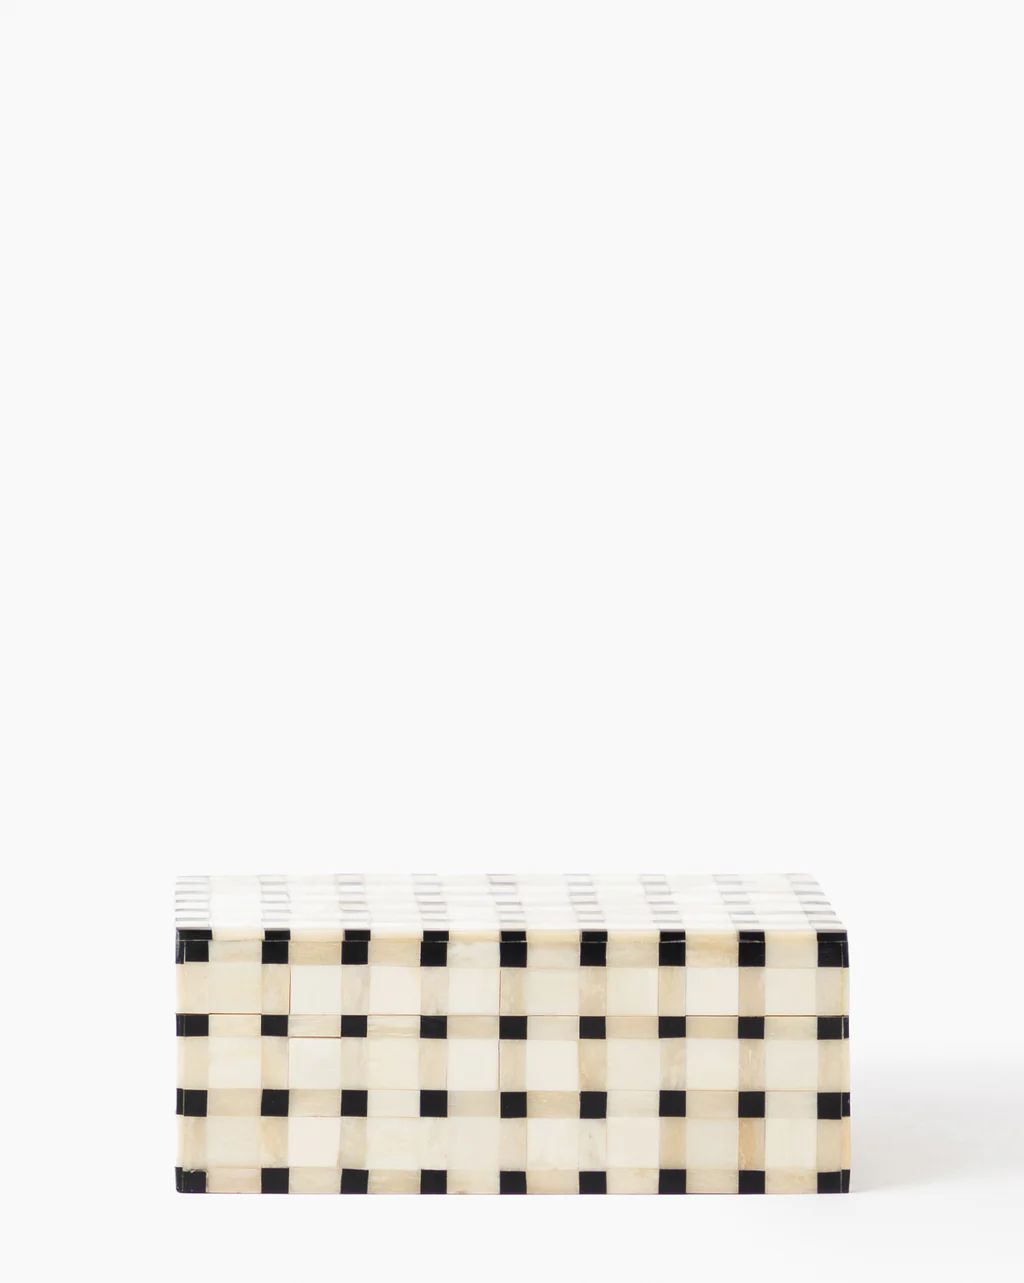 Grid Patterned Box | McGee & Co.